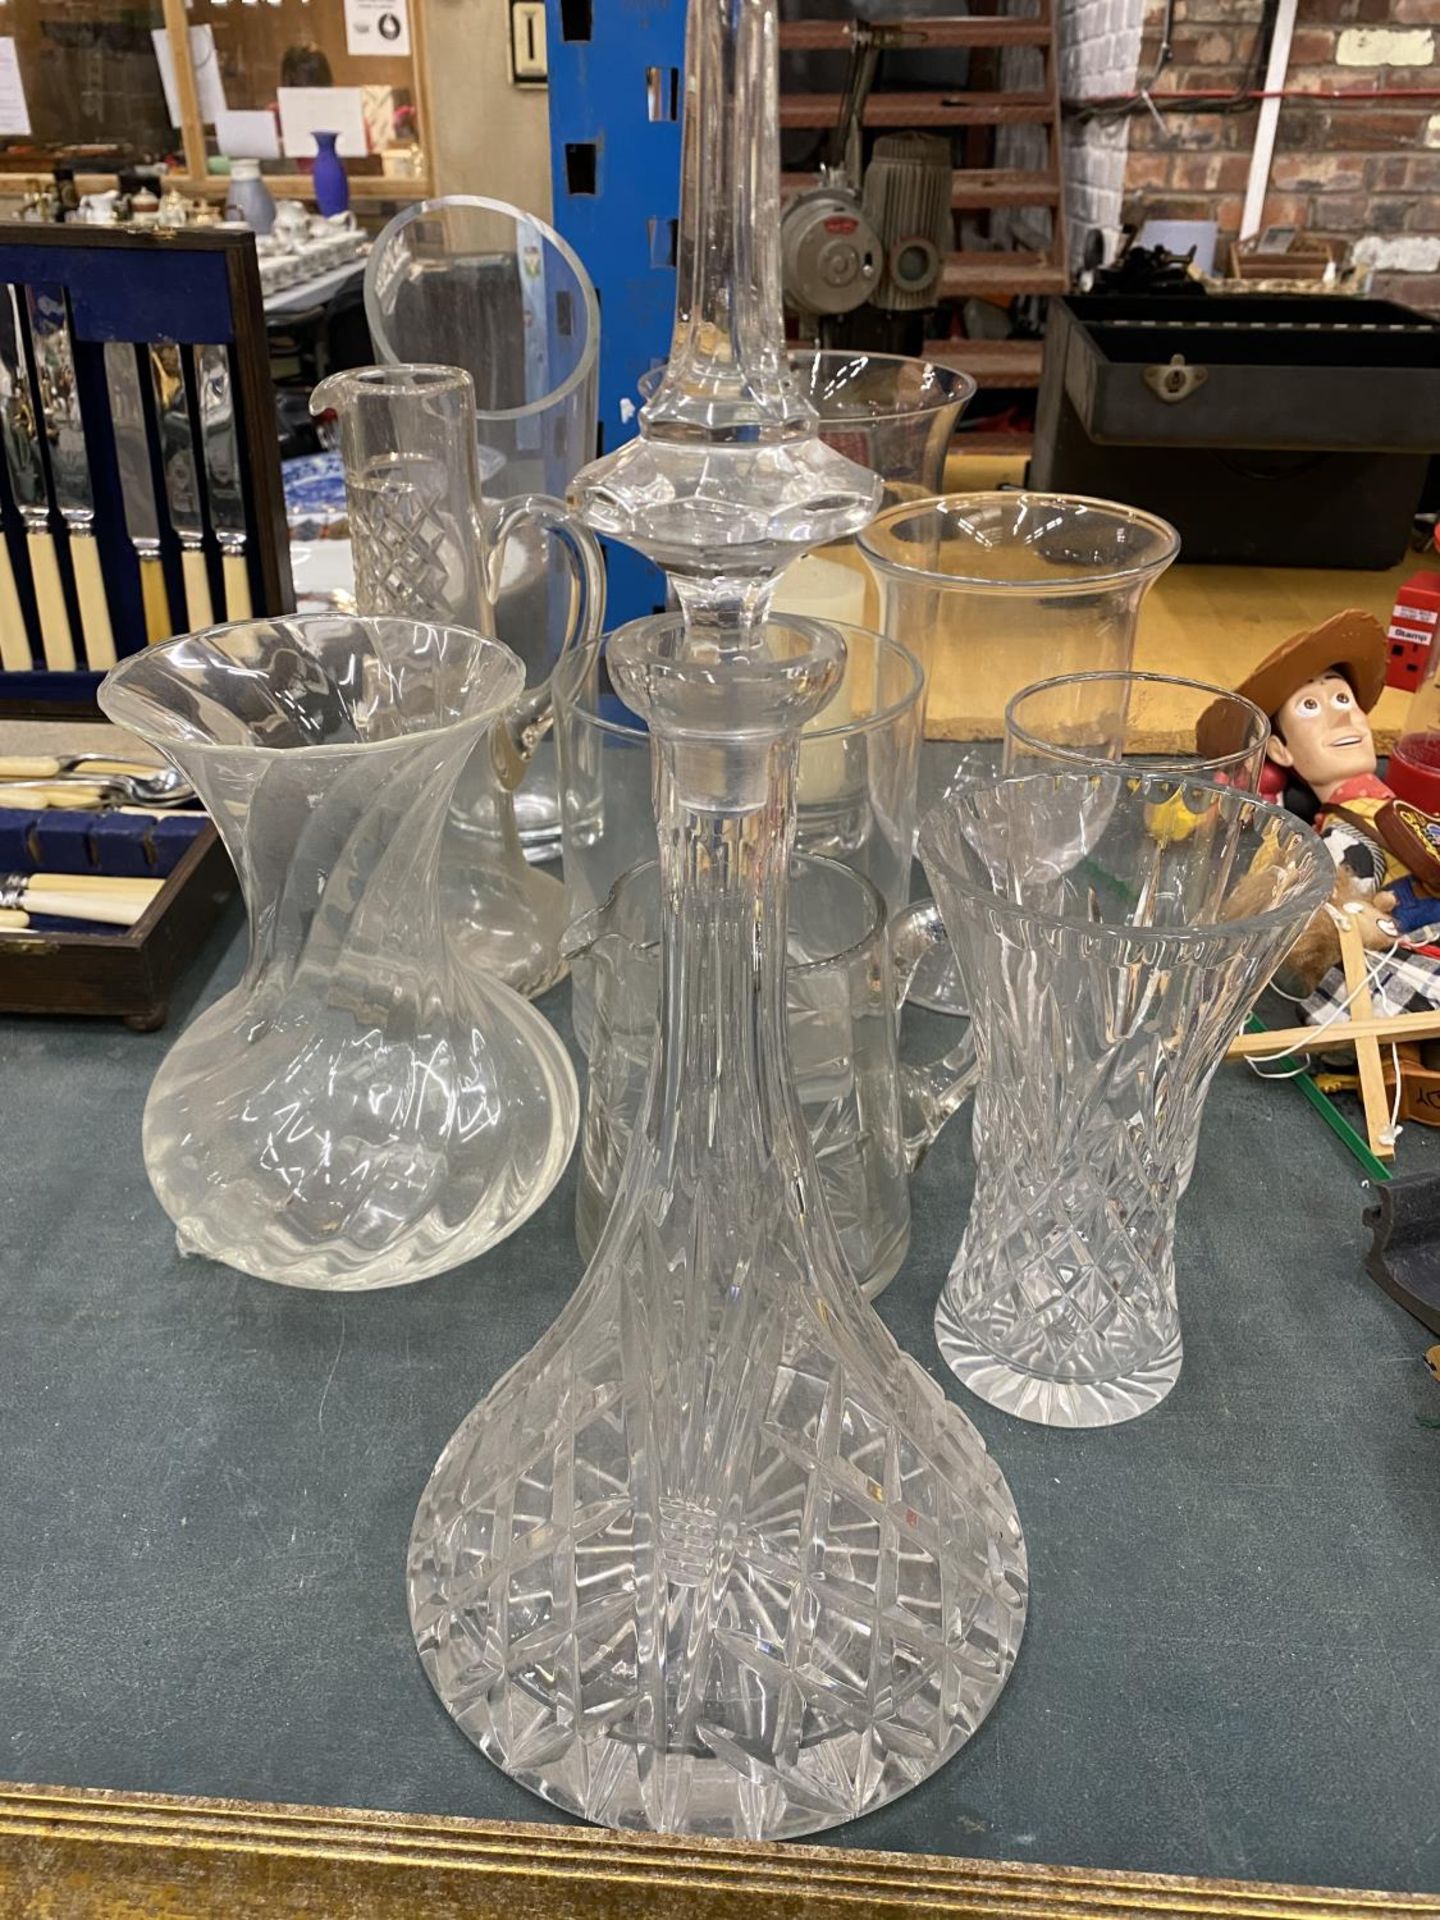 A QUANTITY OF GLASSWARE TO INCLUDE DECANTER, JUGS, VASES, ETC - ALL LARGE PIECES